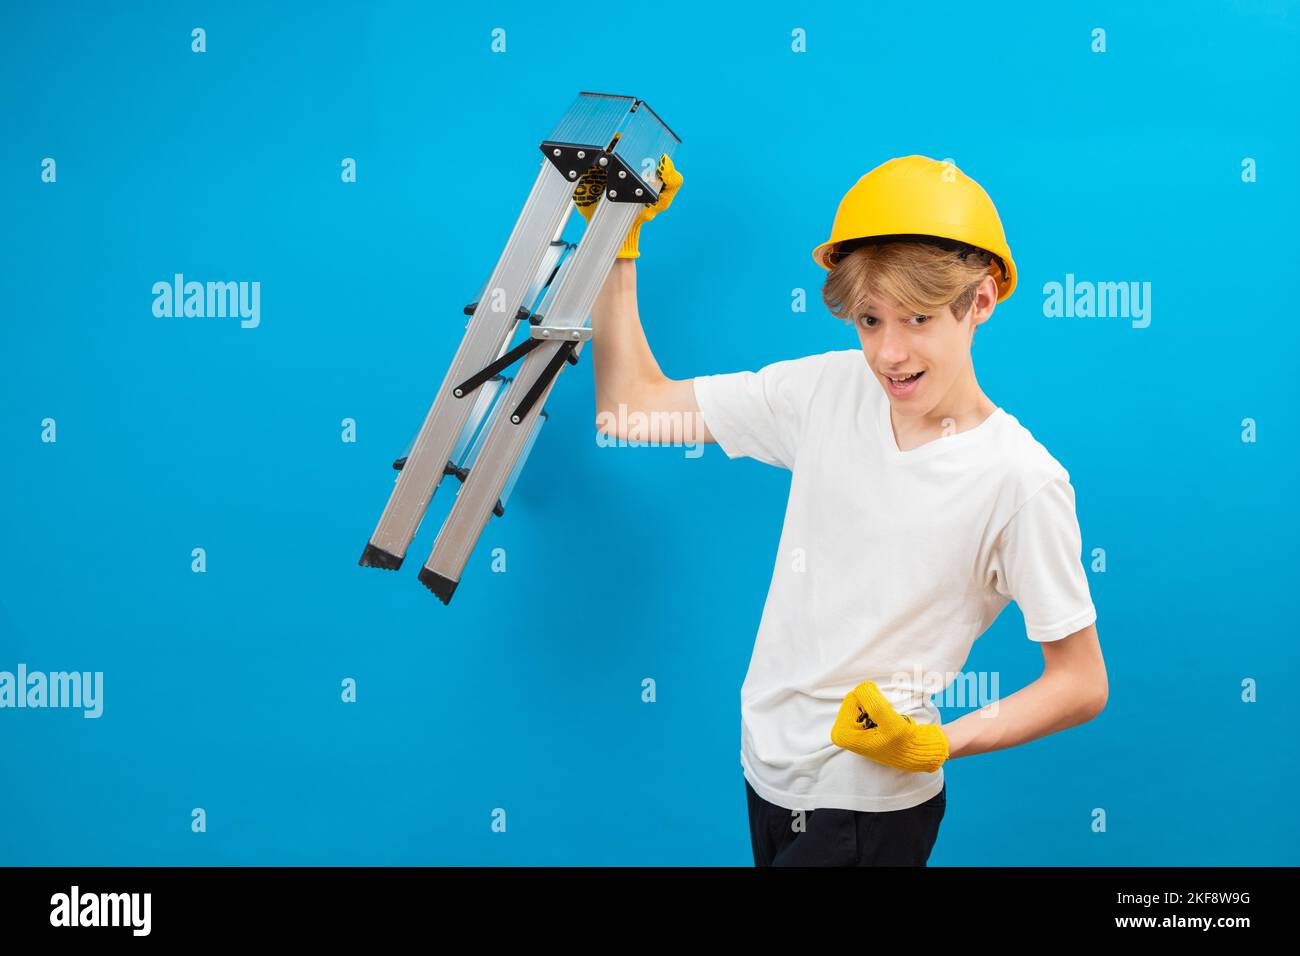 Young repairman teen in white t-shirt and gloves with yellow helmet in head, holding ladder in hands standing in studio on blue background. Stock Photo